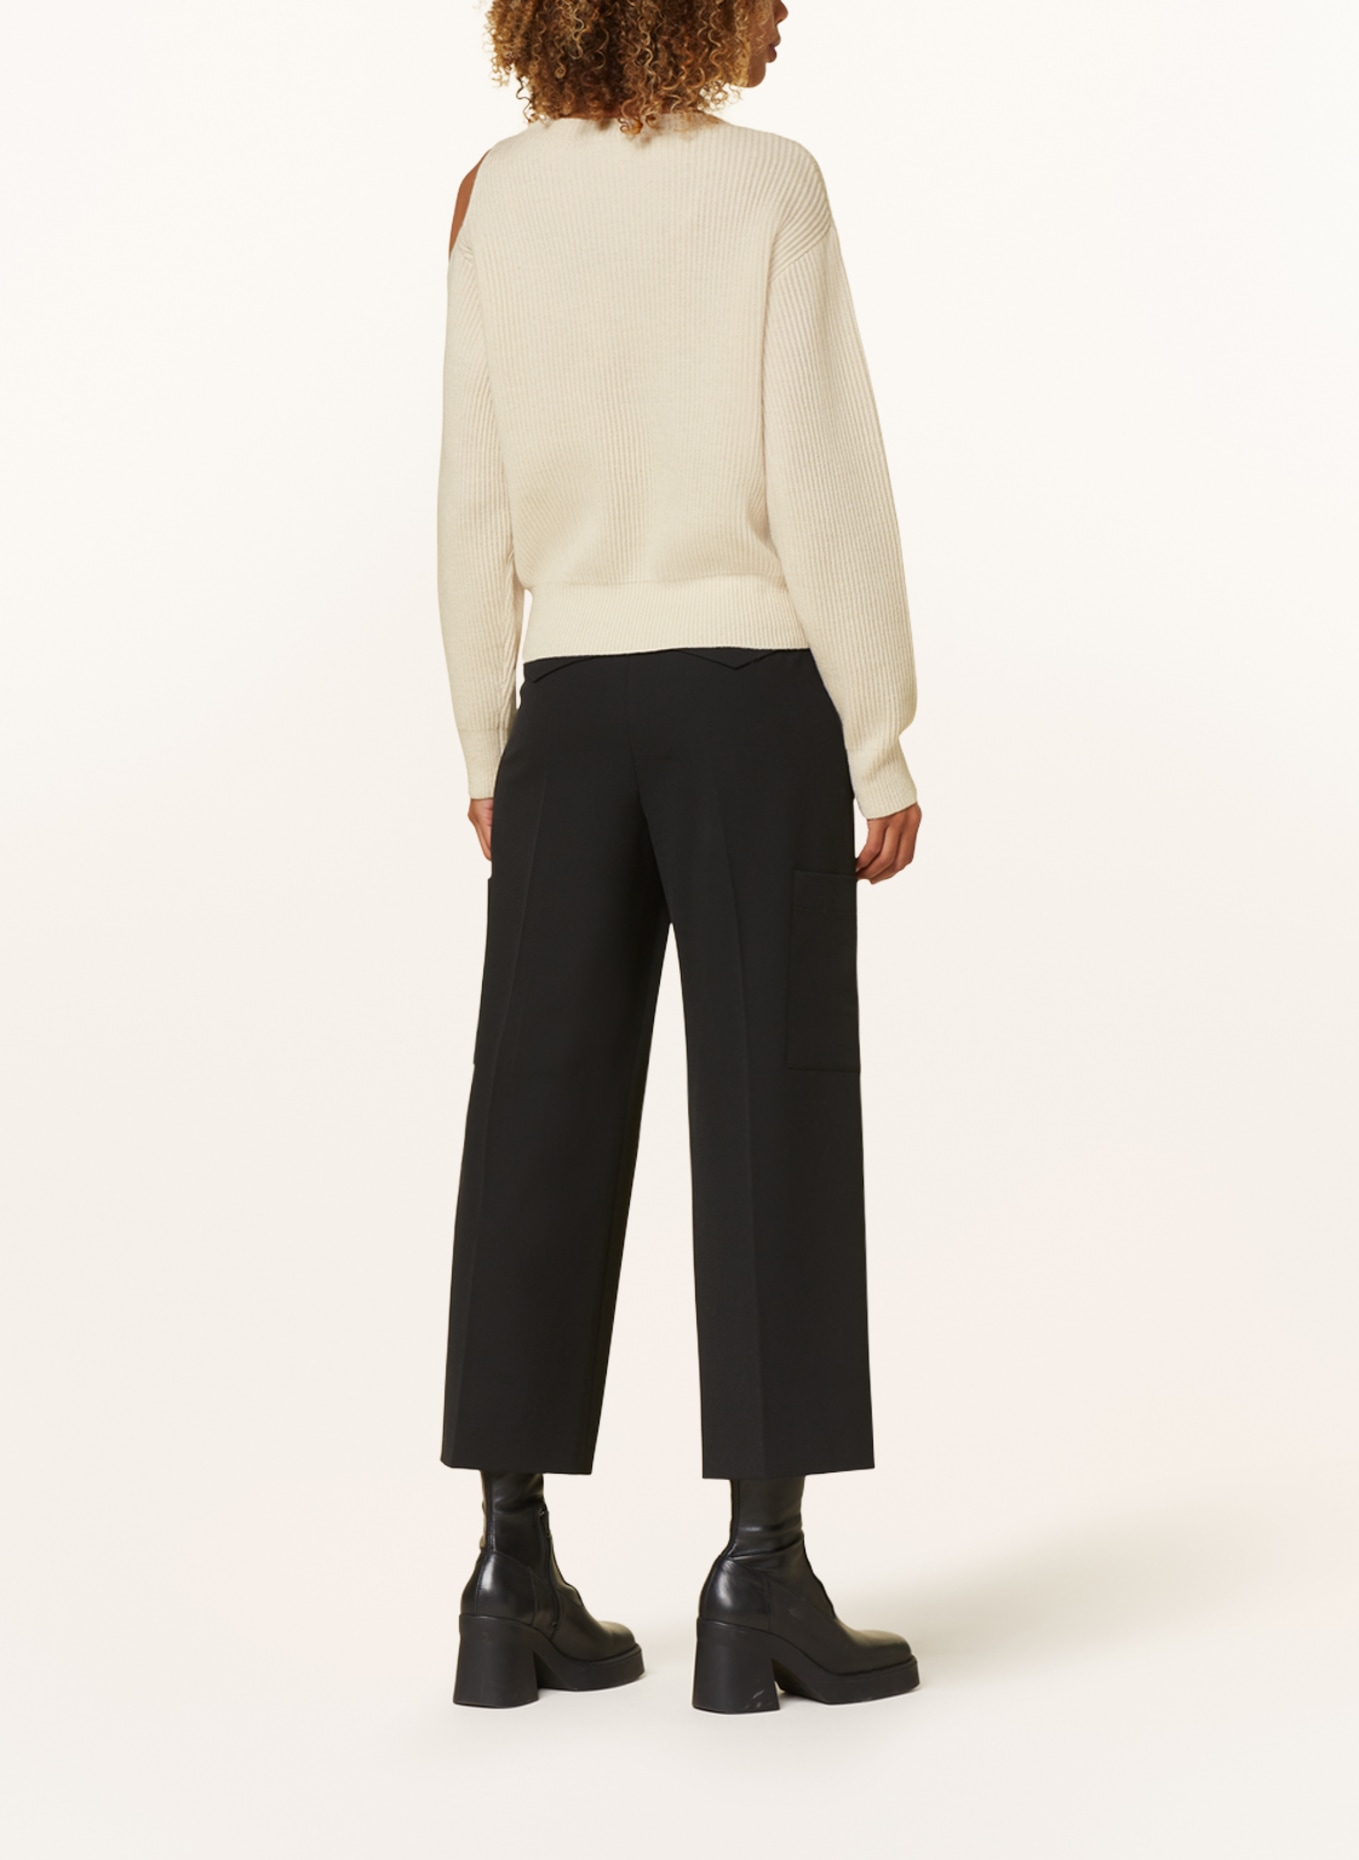 LUISA CERANO Sweater with cut-out, Color: CREAM (Image 3)